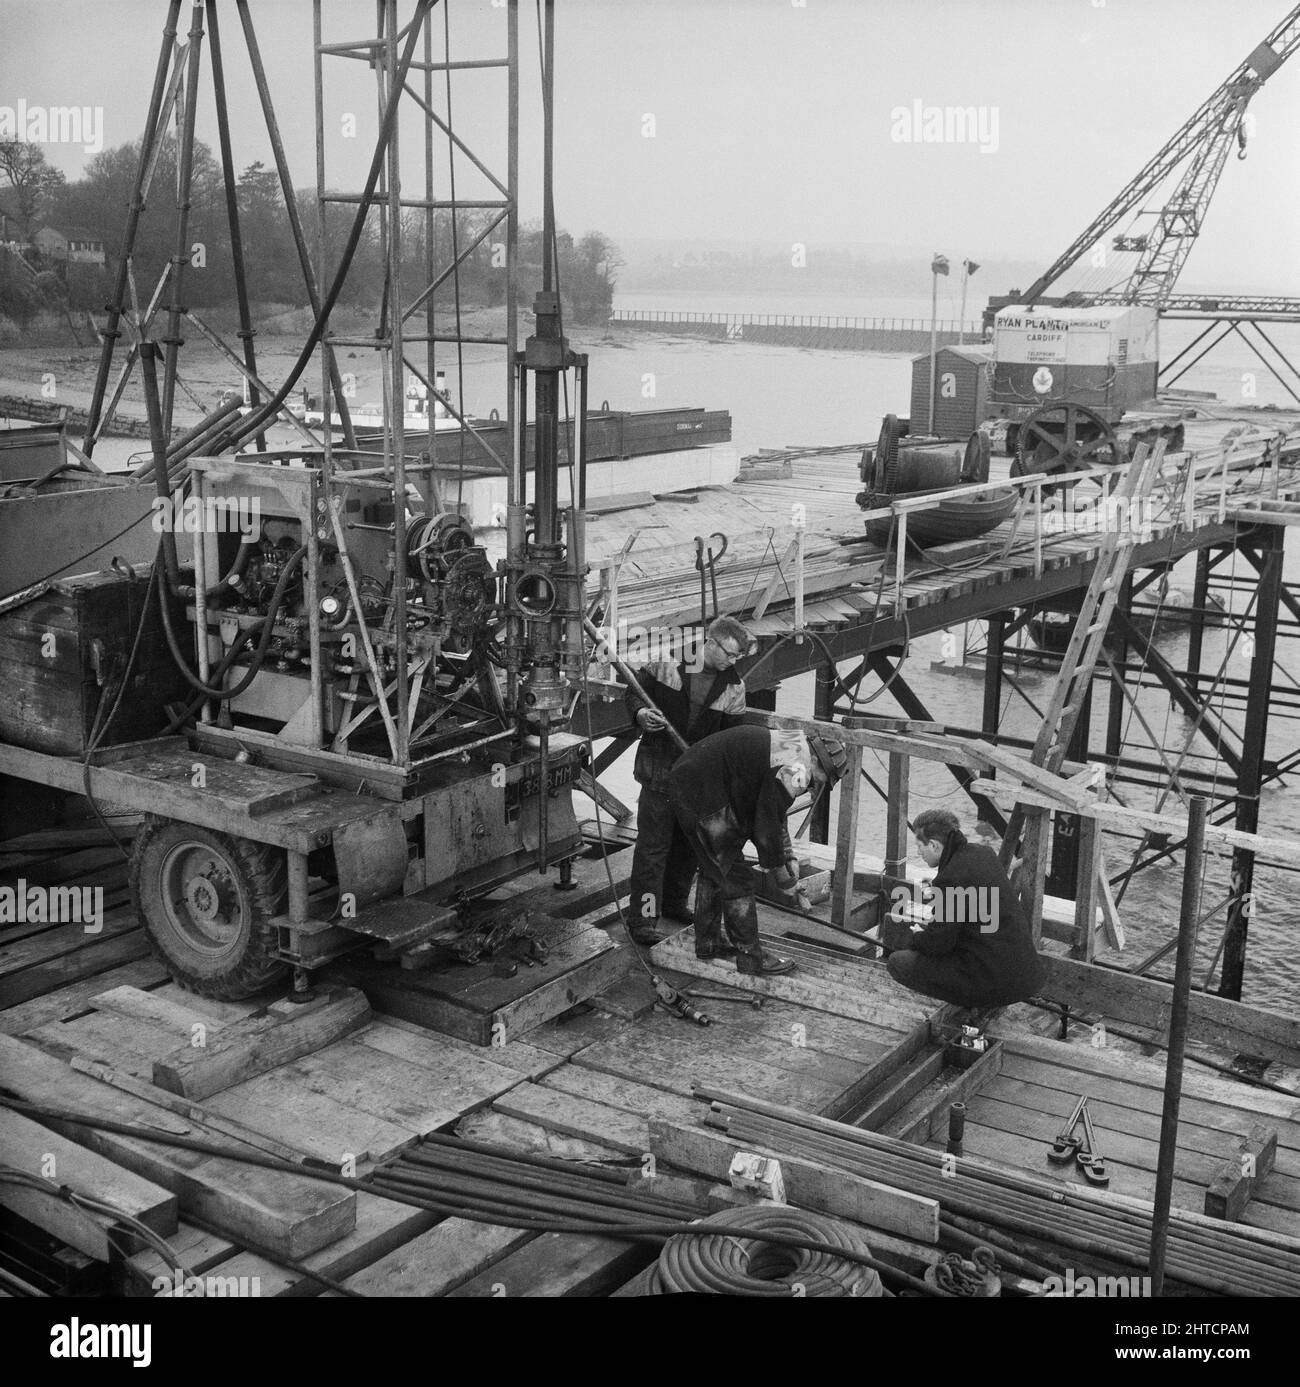 Severn Bridge, M48, Aust, South Gloucestershire, 12/12/1961. Laing workers using a truck-mounted drilling rig on the temporary pontoons at the site of the foundations for the Beachley tower of the Severn Bridge. This photograph was used in the January 1962 issue of Team Spirit, the Laing company newsletter, with the caption 'Ground Engineering Limited: rock-drilling in connection with the Severn Bridge'. The contract for the construction of the foundations for the Severn Bridge was won by John Howard and Company but part of the Laing group seems to have been subcontracted for the investigation Stock Photo